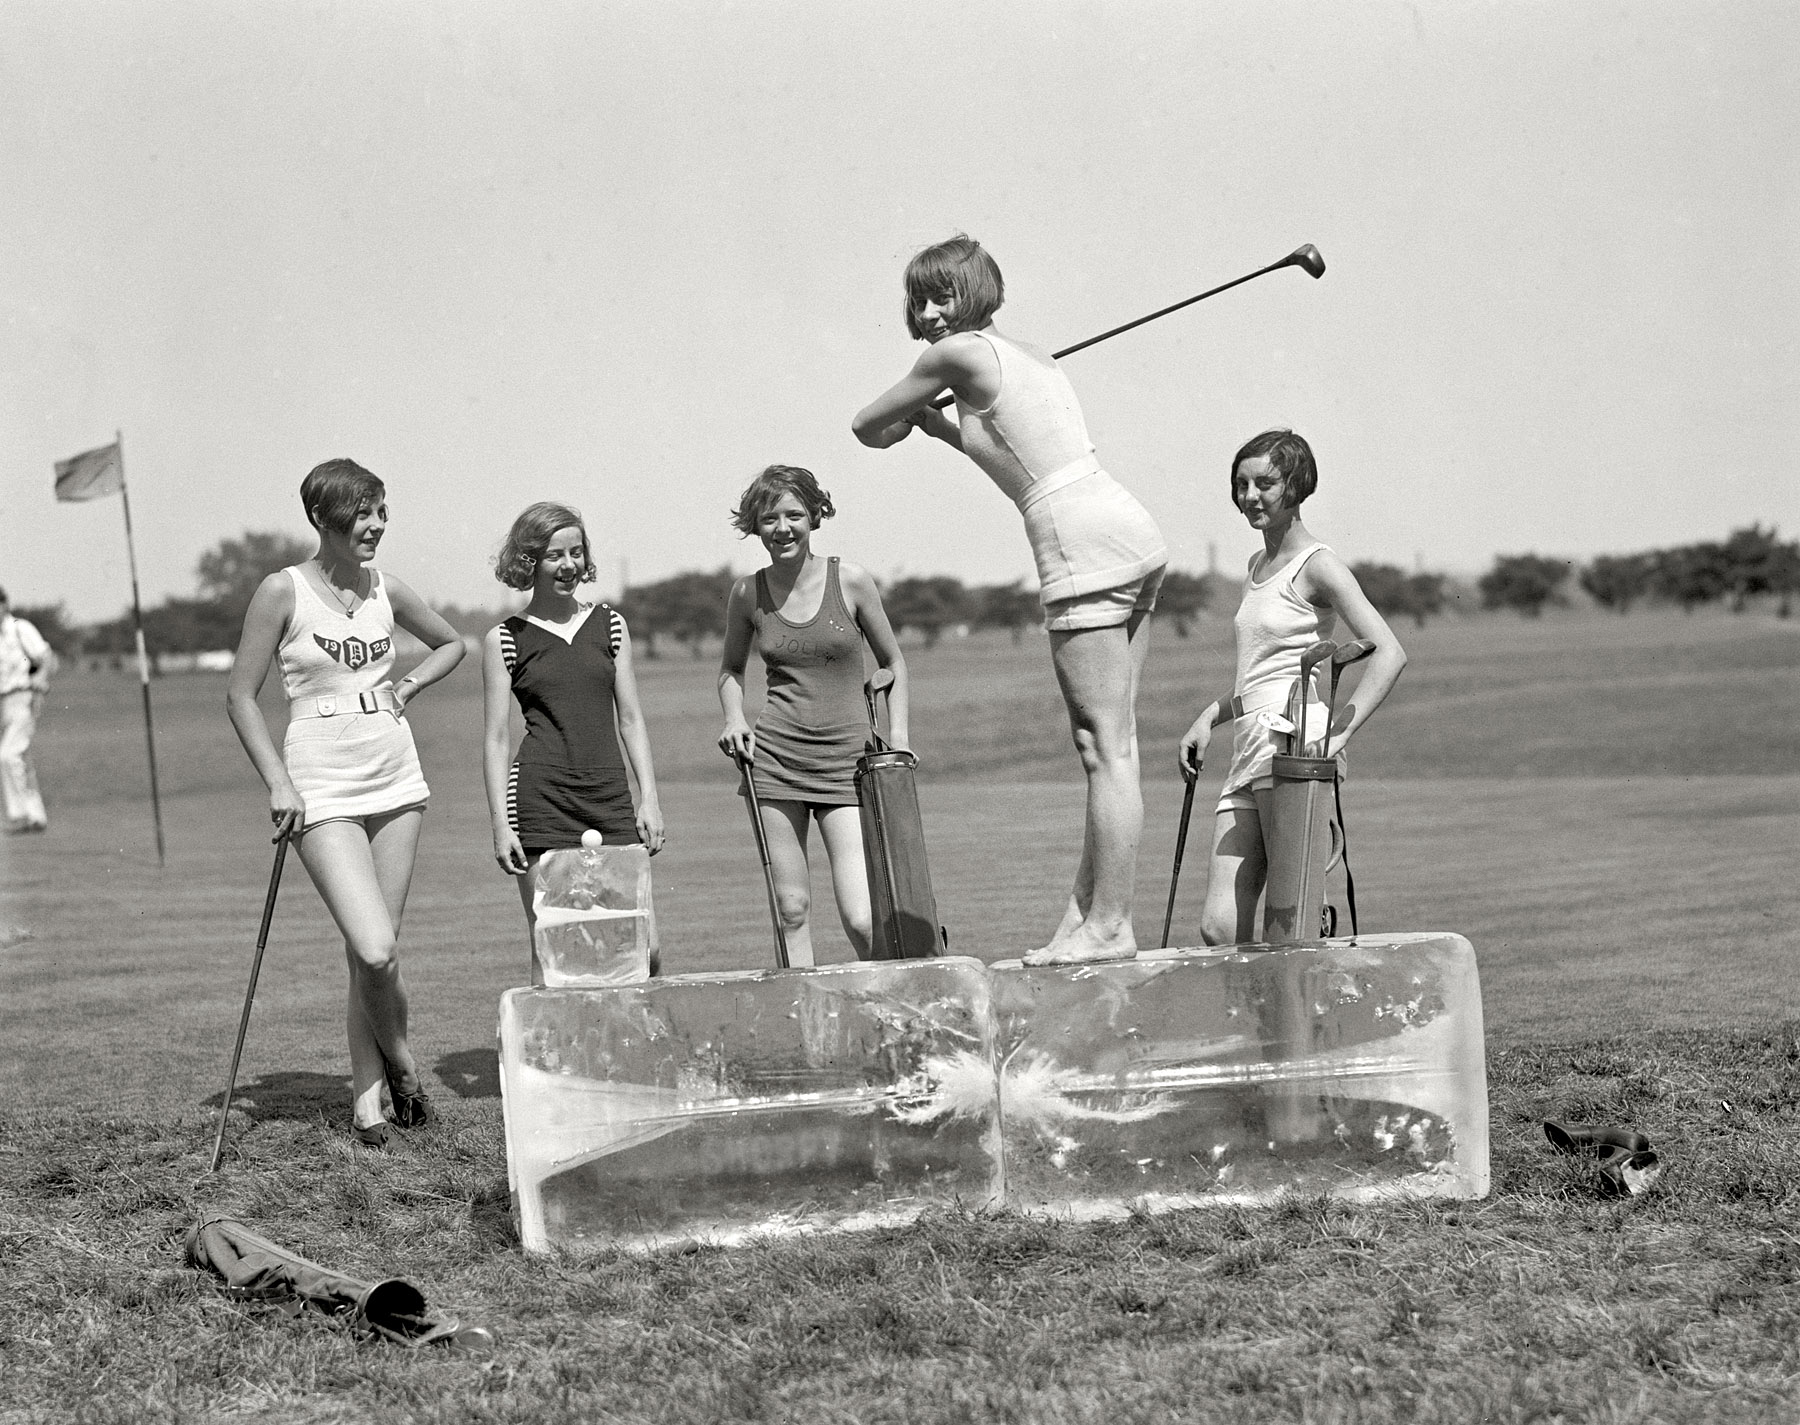 July 9, 1926. "Golf in bathing suits -- icing off at the tee. Miss Dorothy Kelly teeing off on a cake of ice. The others in the group are Misses Virginia Hunter, Elaine Griggs, Hazel Brown, and Mary Kaminsky of the Washington, D.C. area." Previously spied here and here, and in color here. View full size.